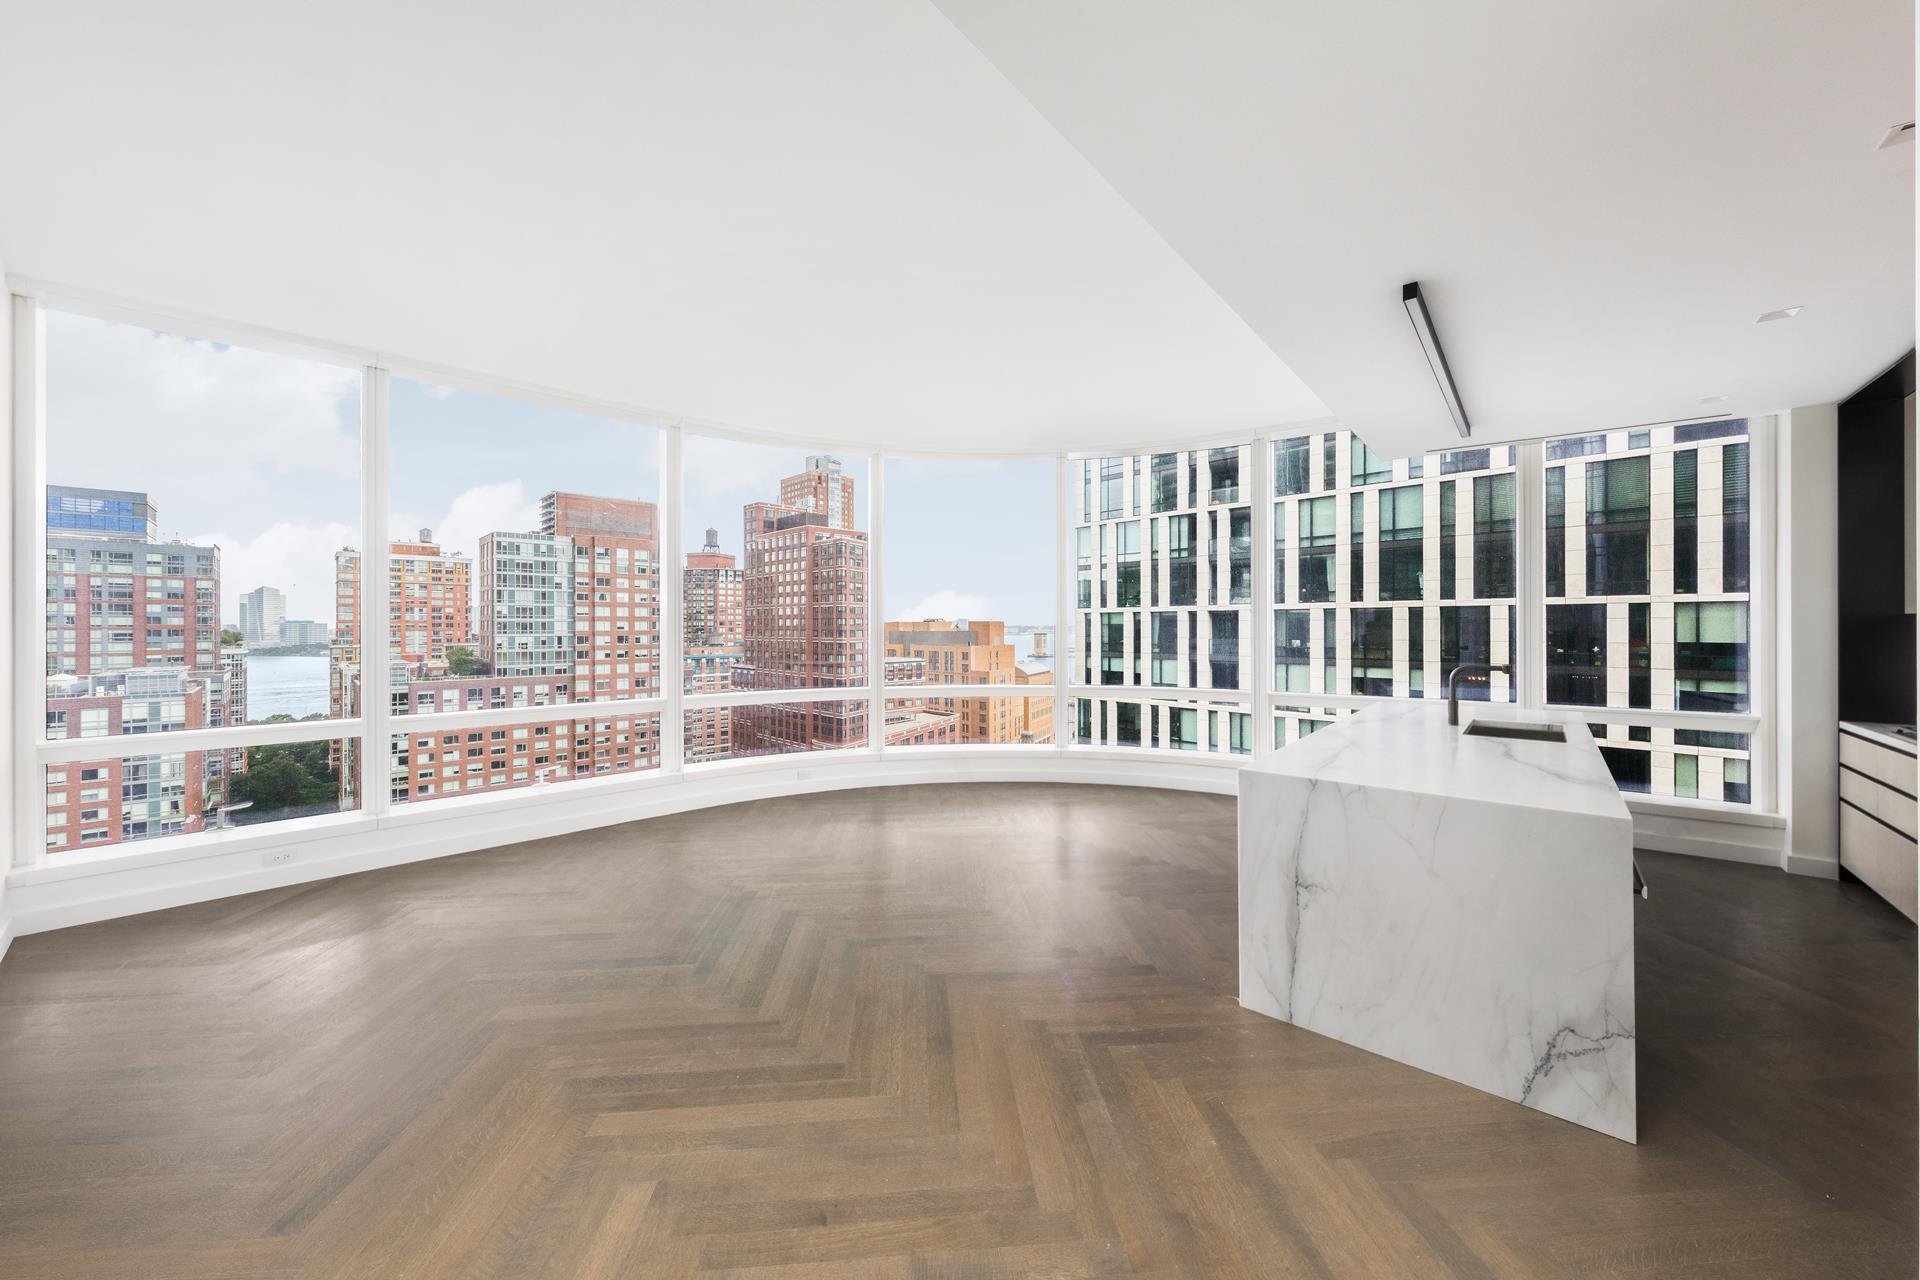 111 Murray Street 16W, Tribeca, Downtown, NYC - 4 Bedrooms  
4.5 Bathrooms  
7 Rooms - 